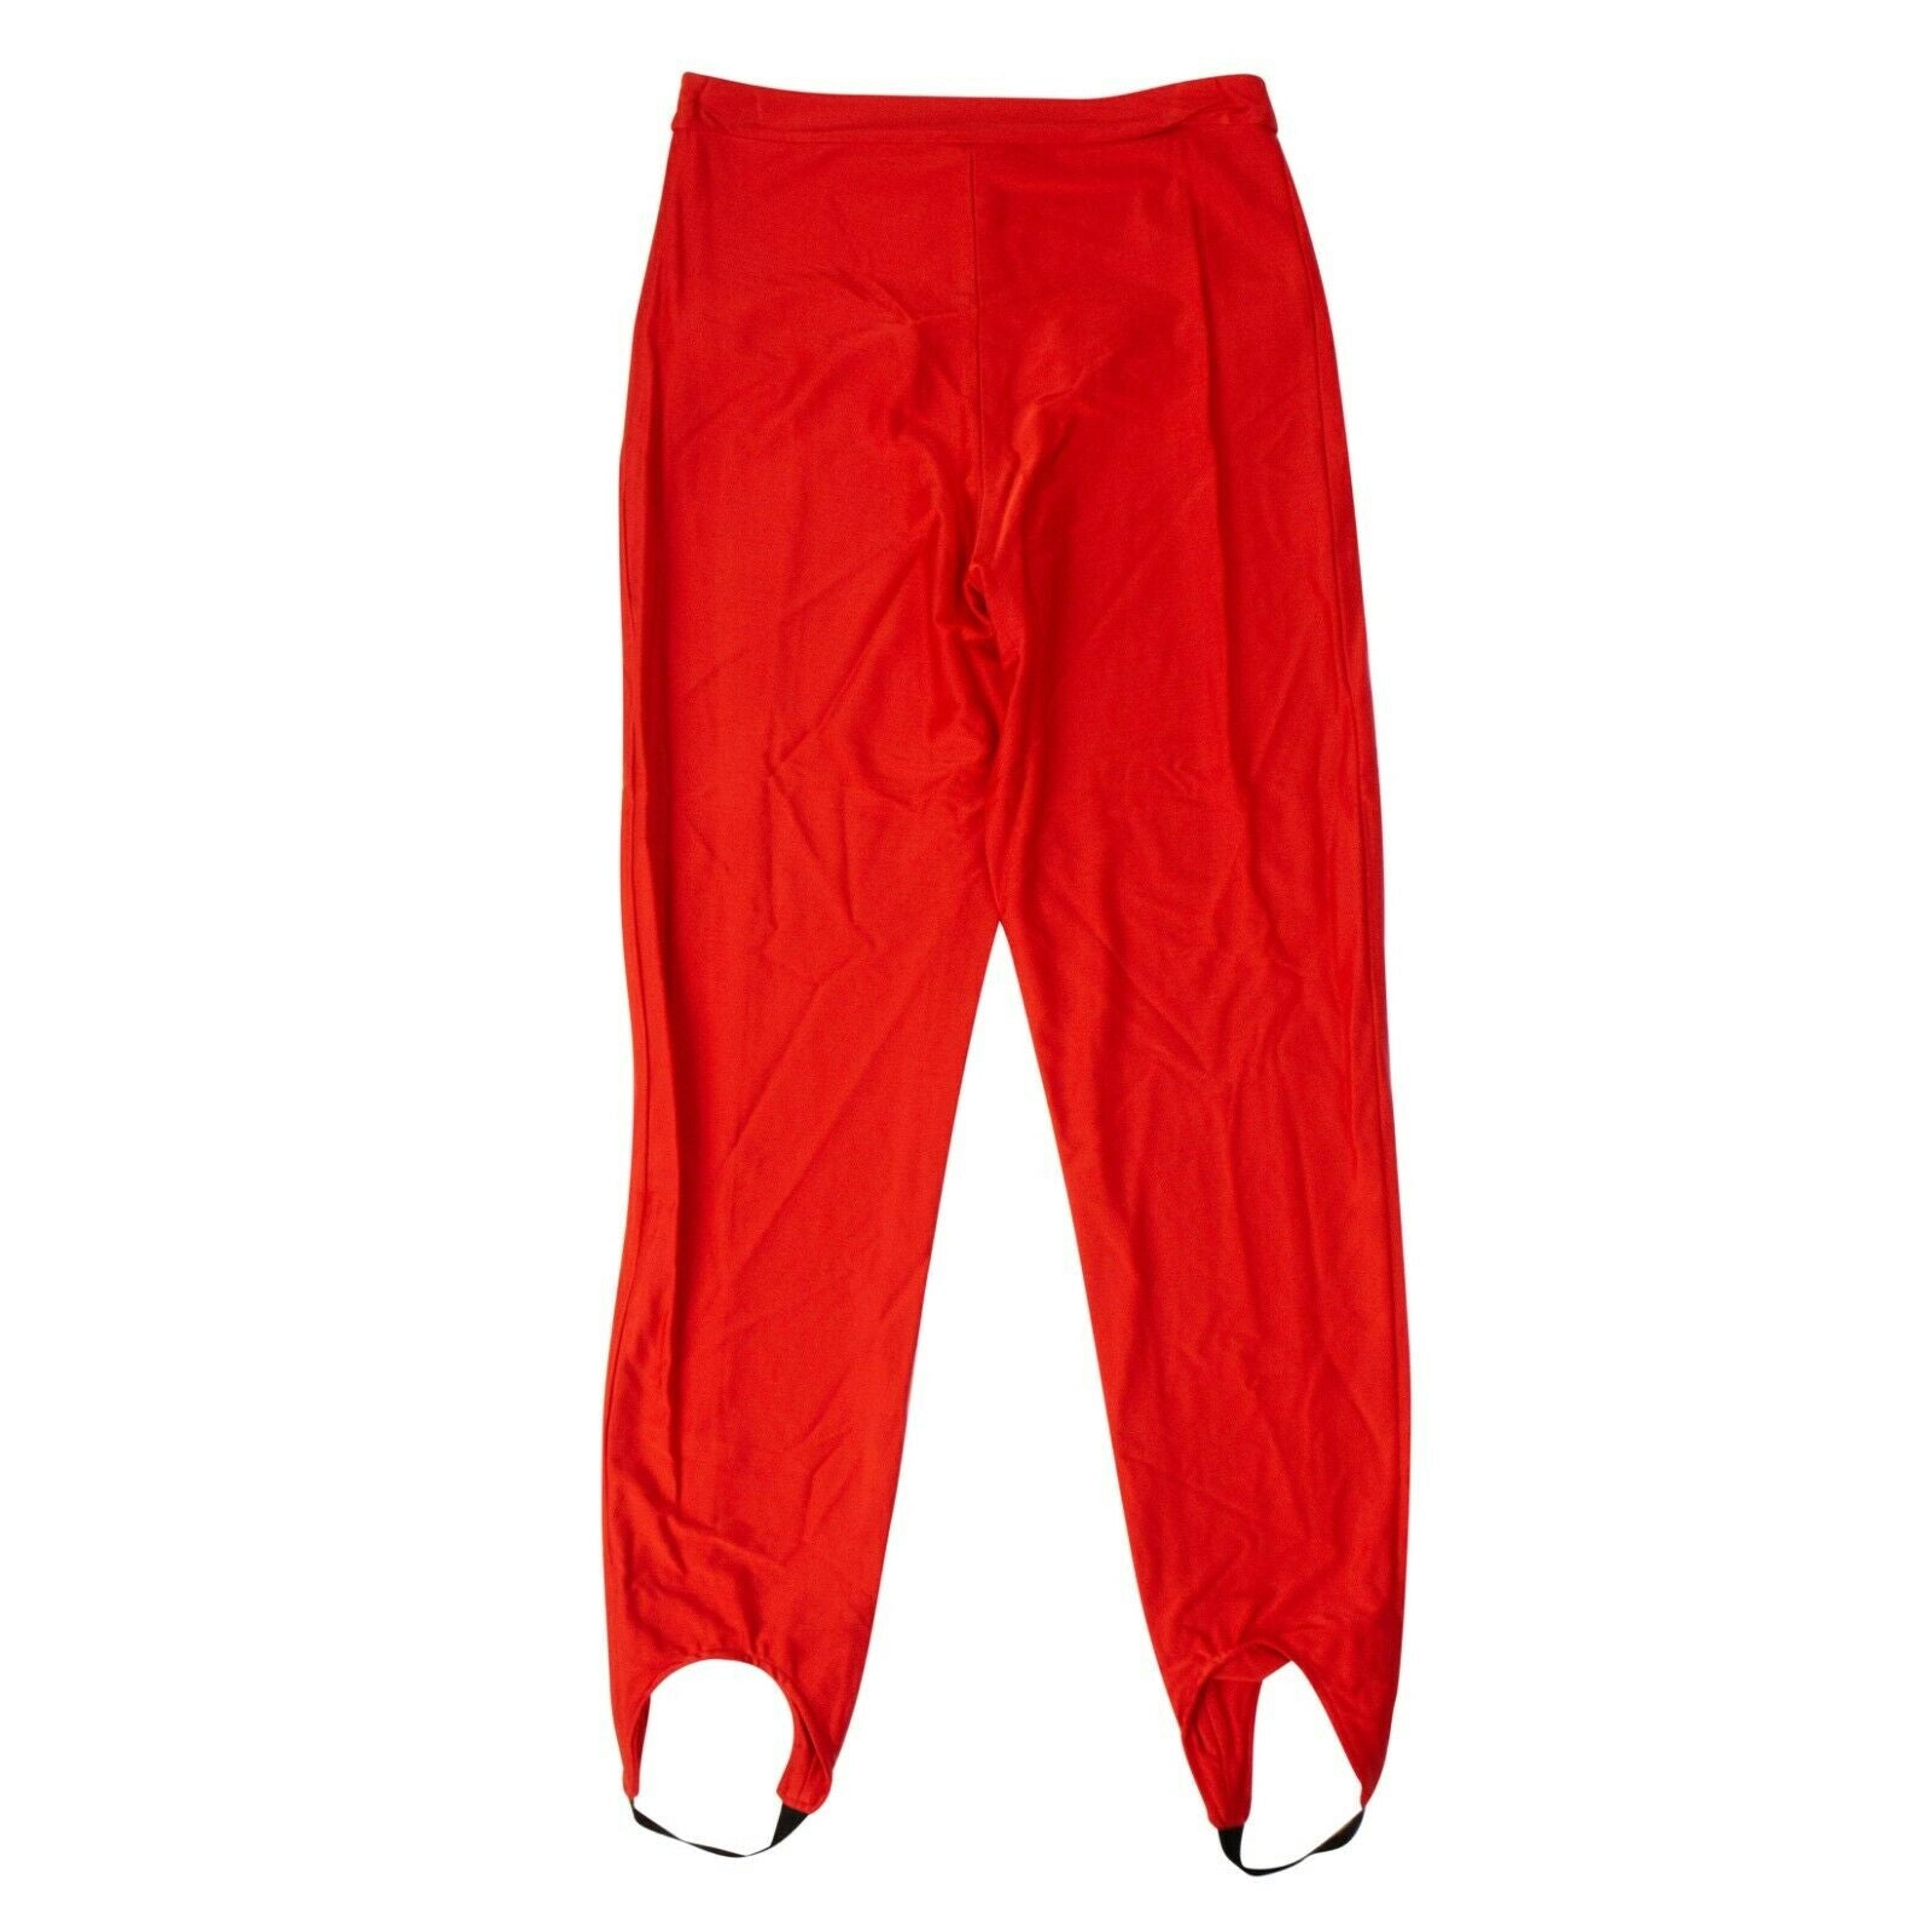 Alternate View 1 of Unravel Project Slim Fit Stirrup Pants - Red